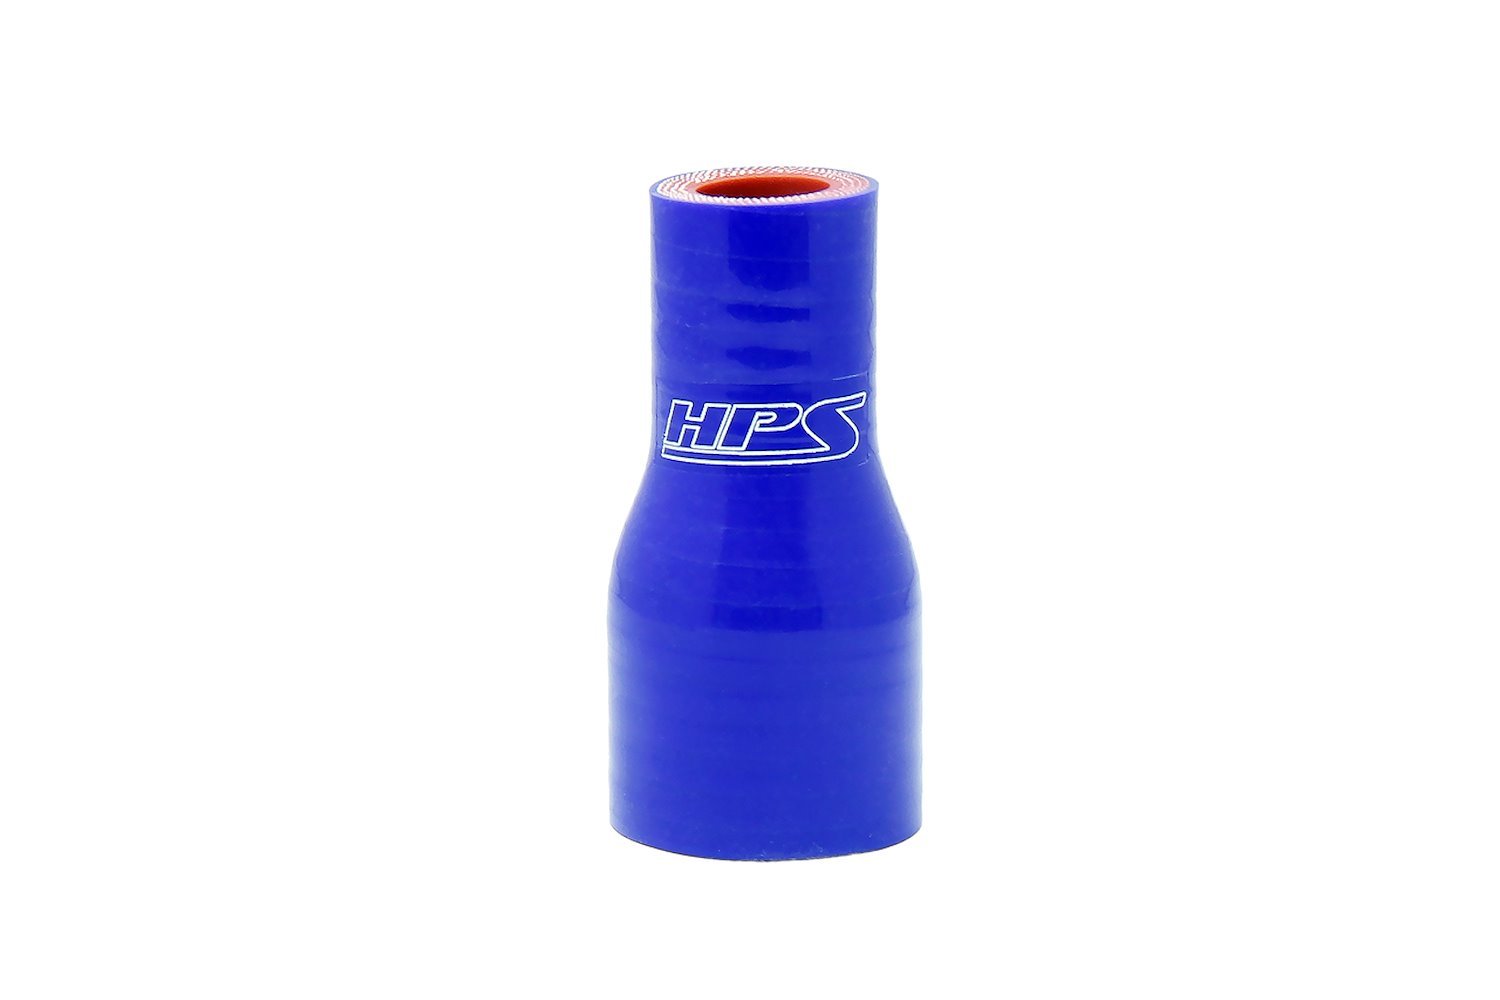 HTSR-062-100-BLUE Silicone Reducer Hose, High-Temp 4-Ply Reinforced, 5/8 in. - 1 in. ID, 3 in. Long, Blue